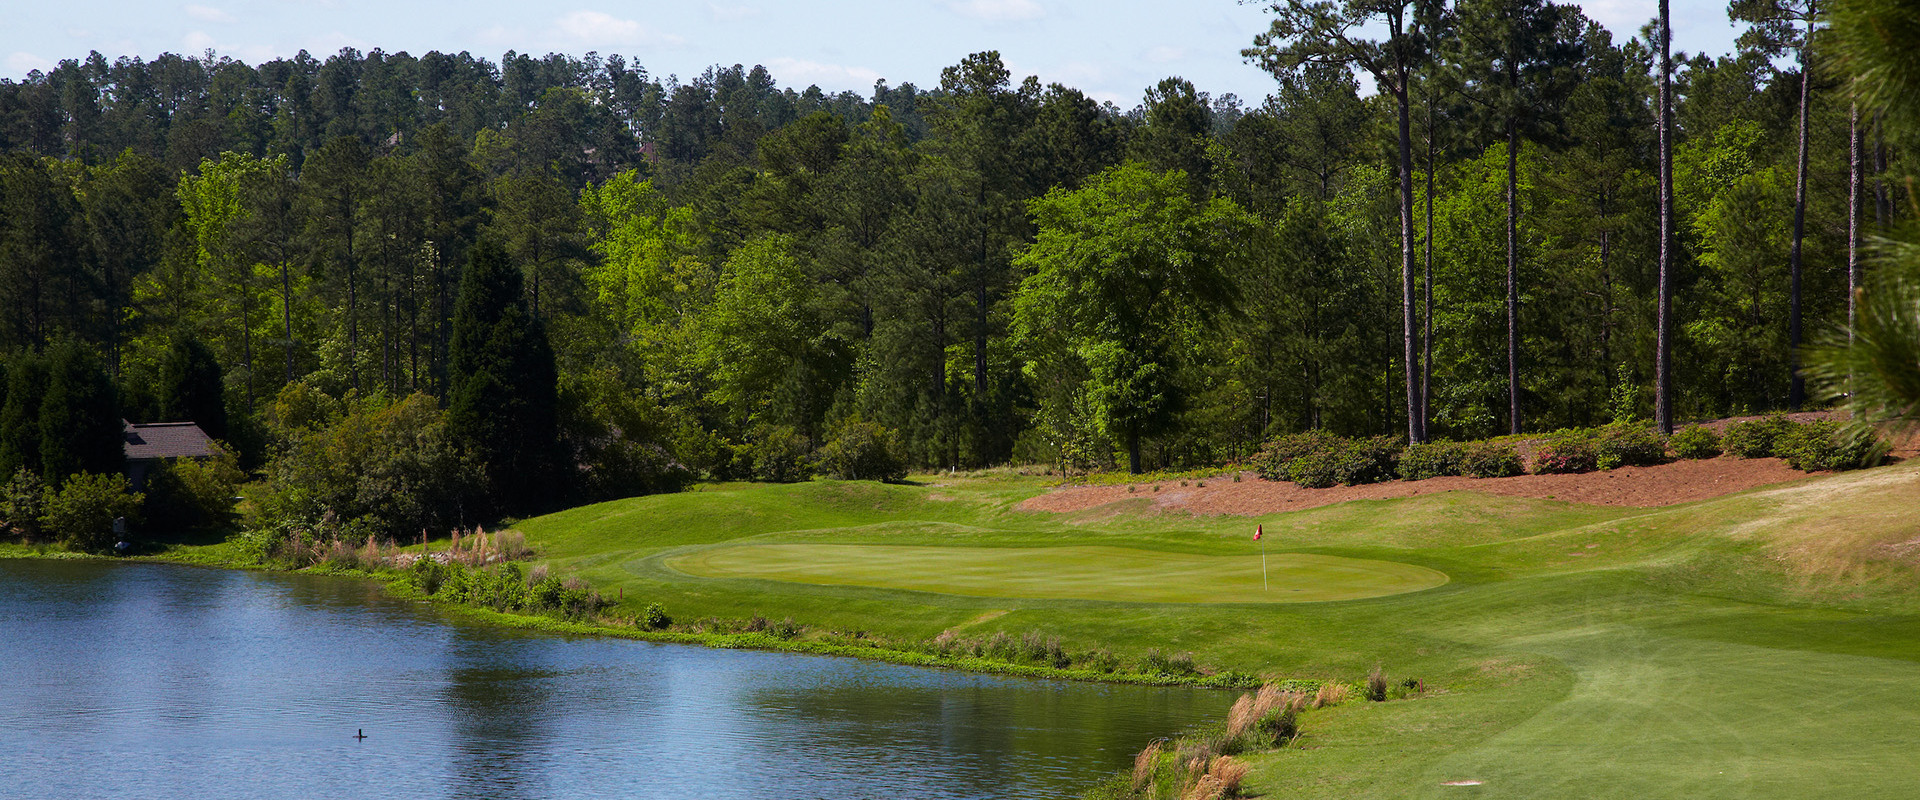 Discovering the Best Golf Courses and Country Clubs in Aiken, South Carolina